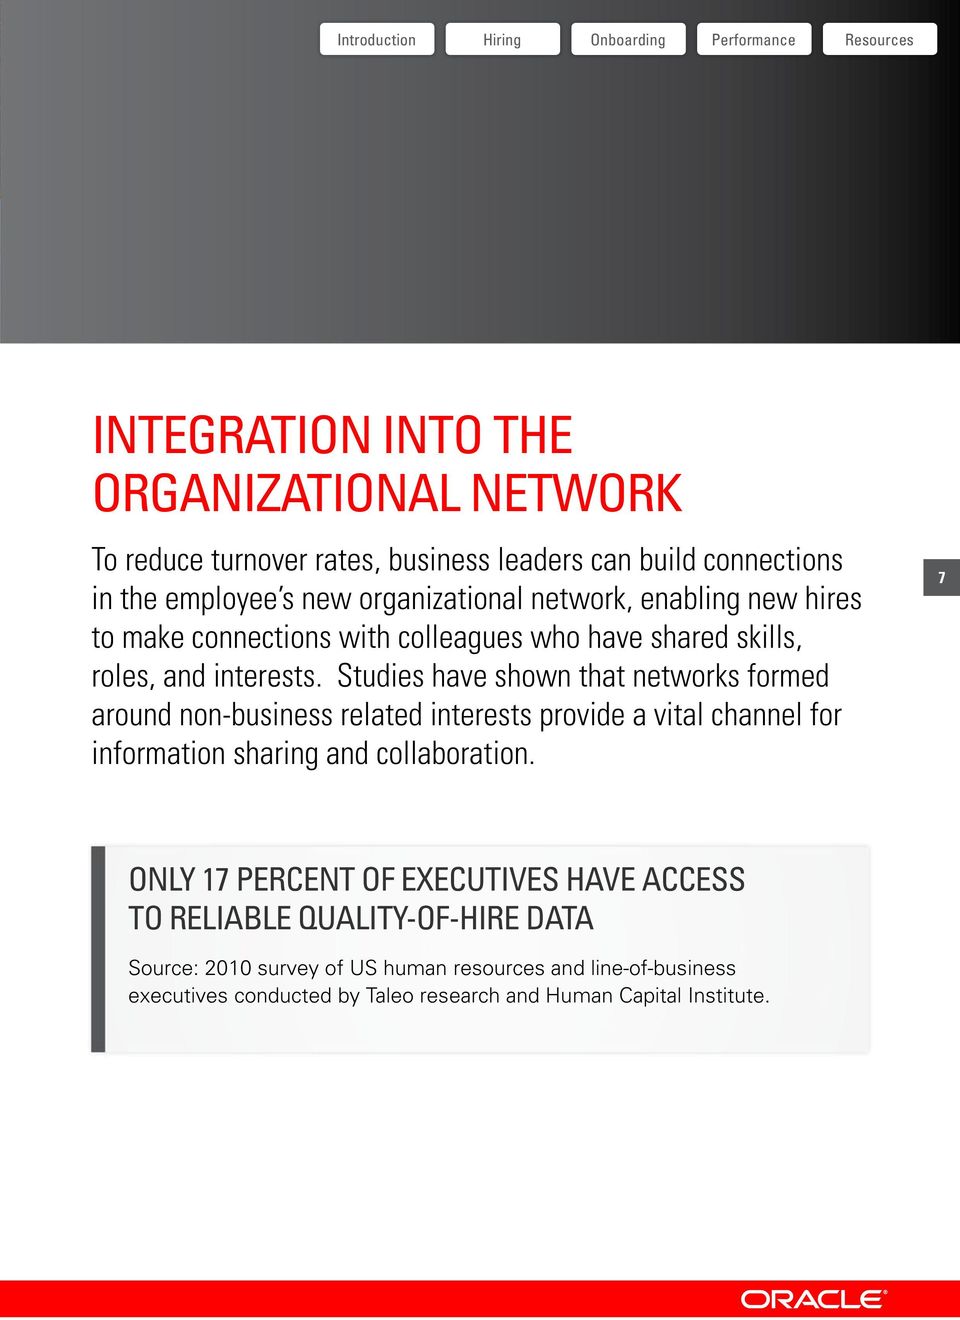 Studies have shown that networks formed around non-business related interests provide a vital channel for information sharing and collaboration.